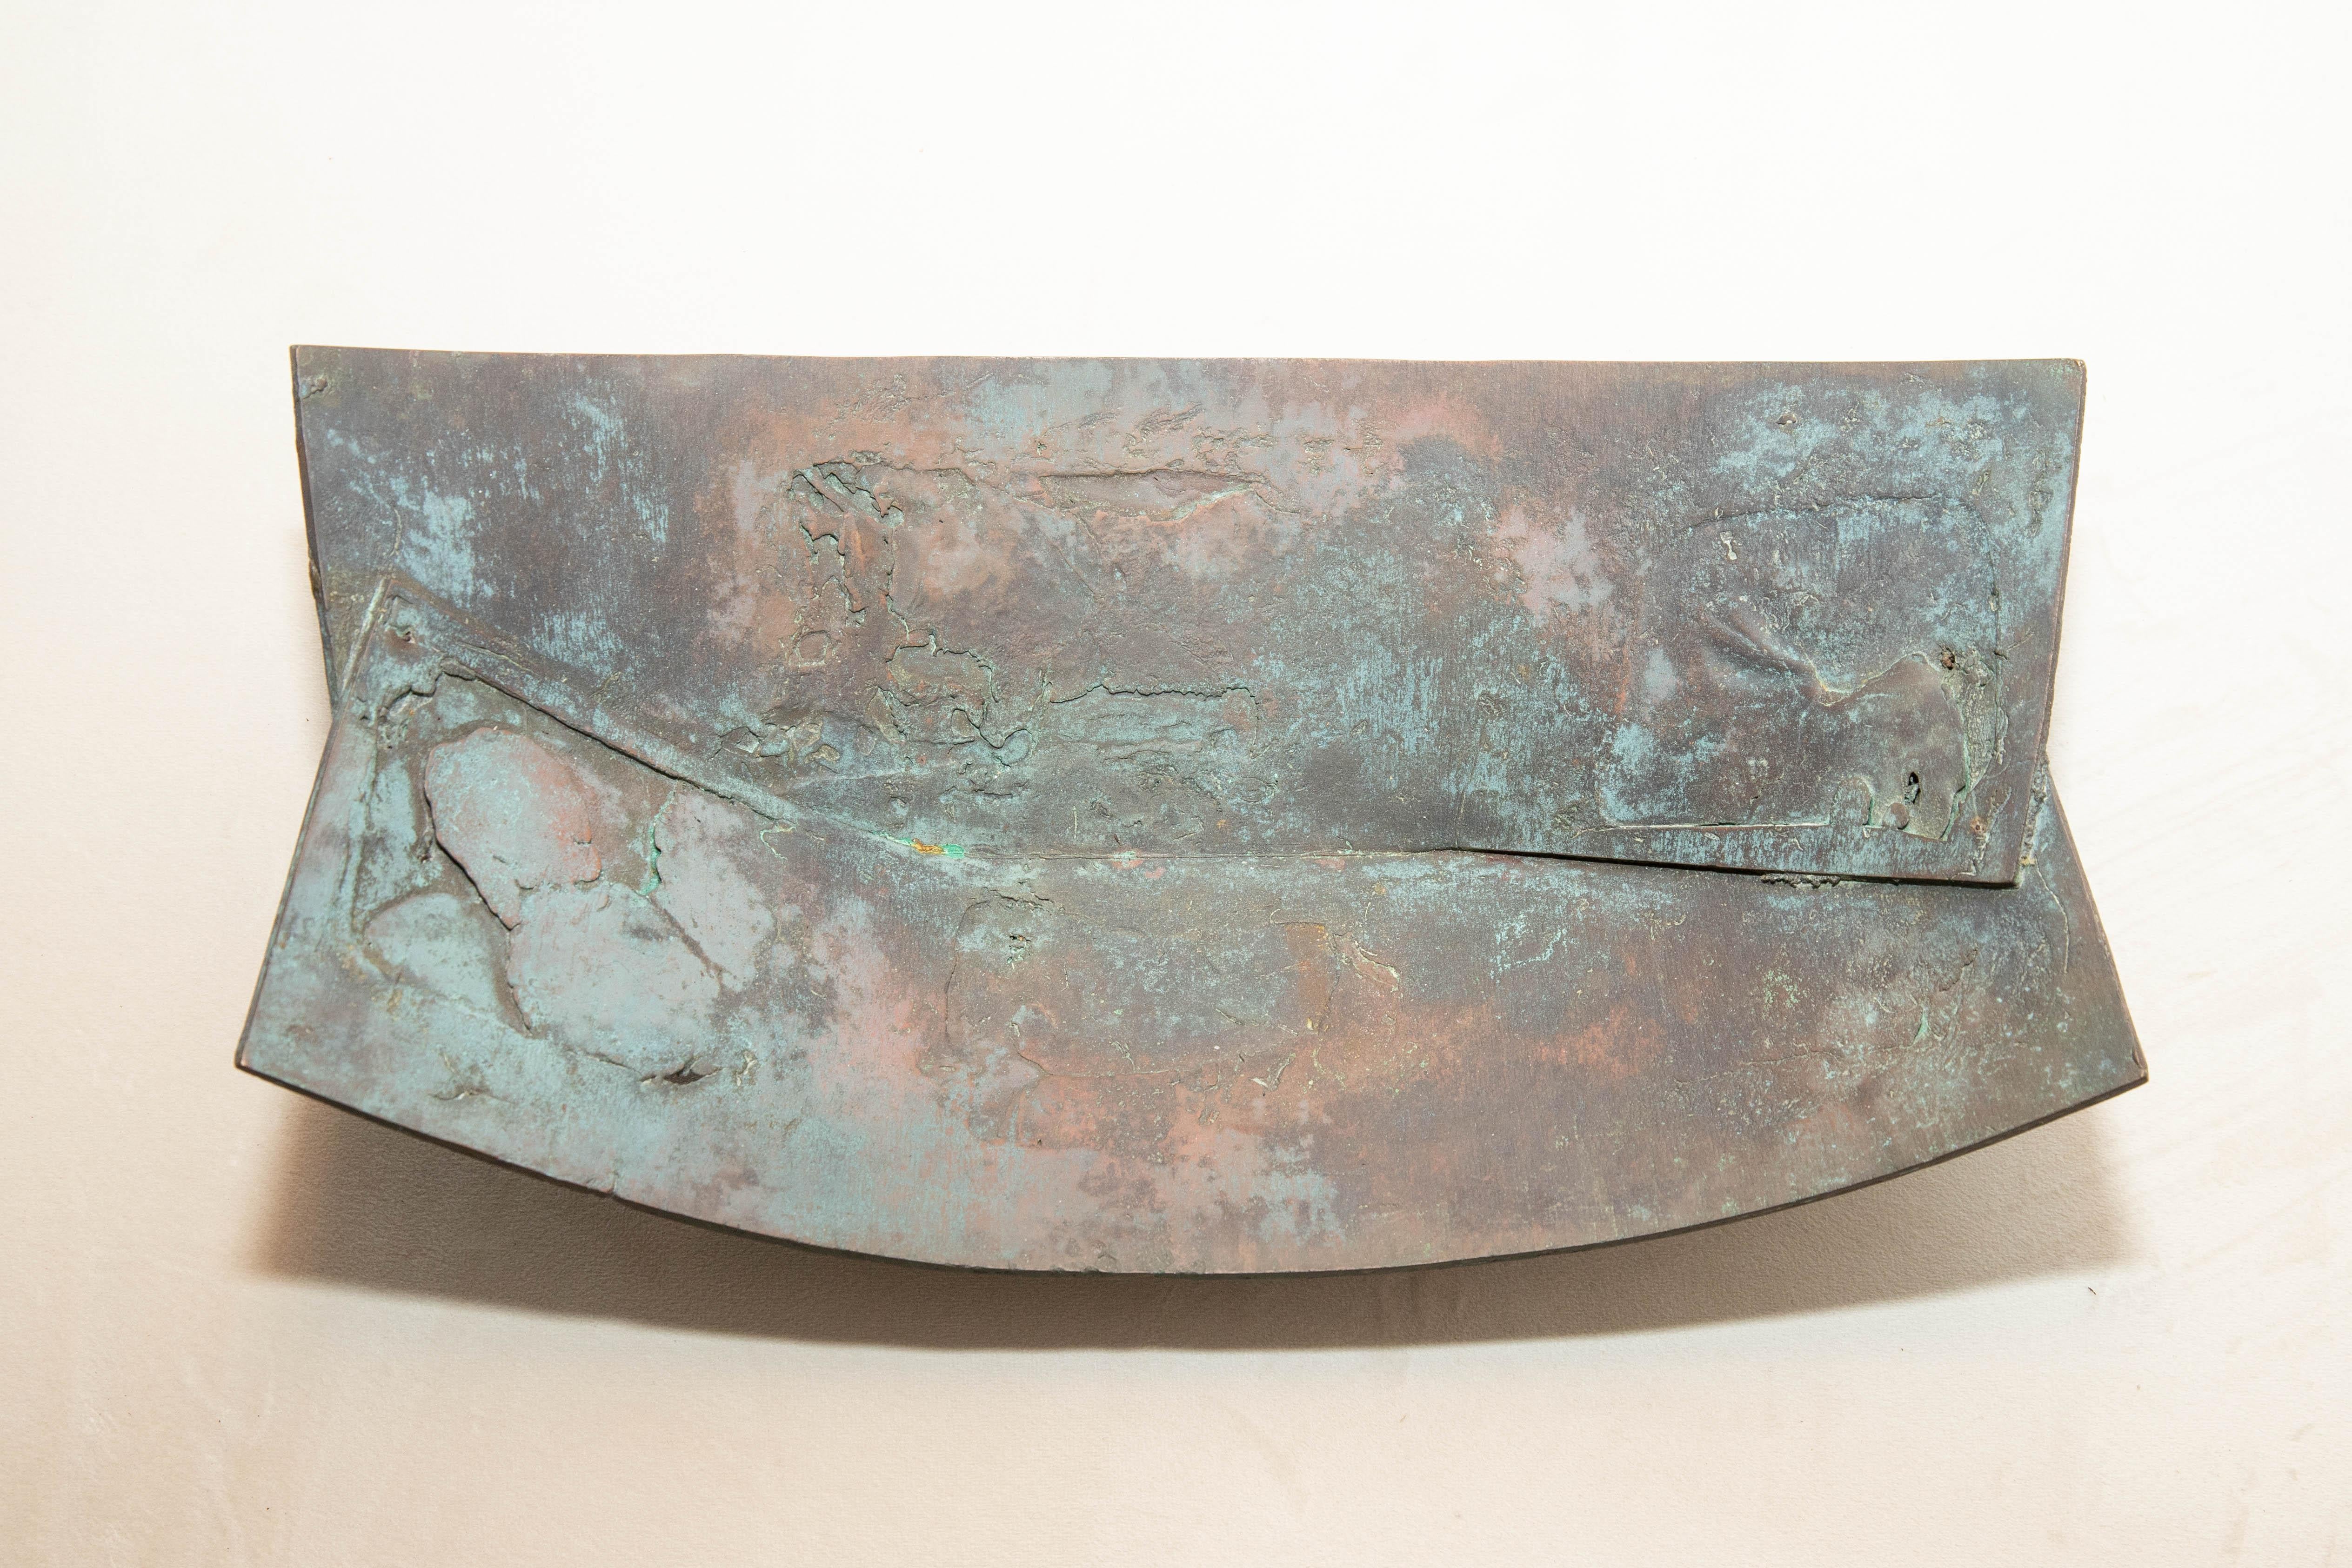 Mission Sculptural Patinated Iron Bowl